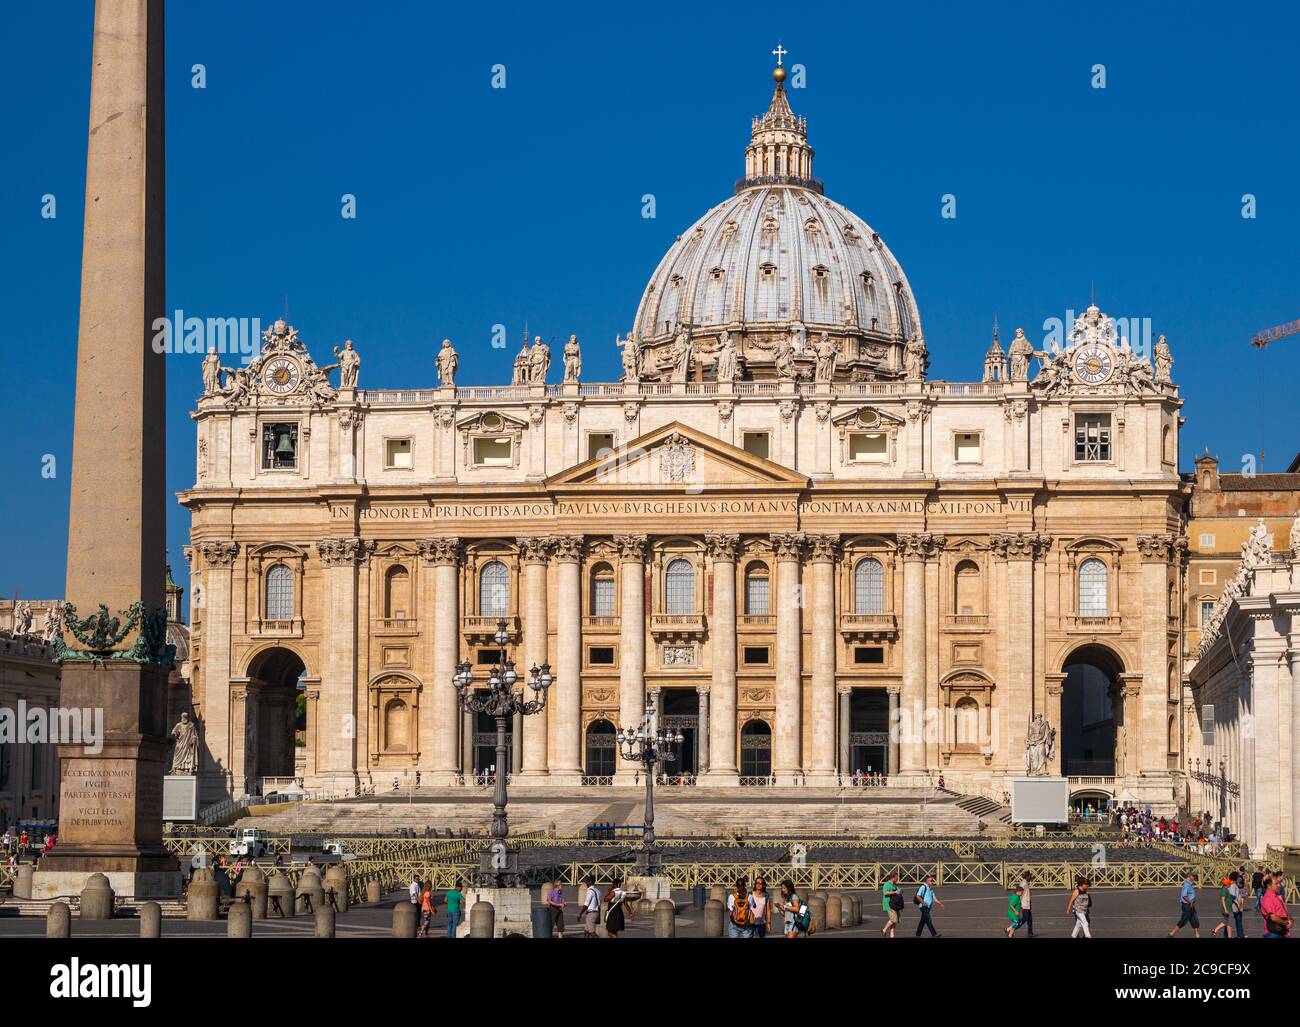 Direct shot against blue sky of St Peter's Basilica, the largest church in the world, built in Renaissance style. Rome, Italy. Stock Photo